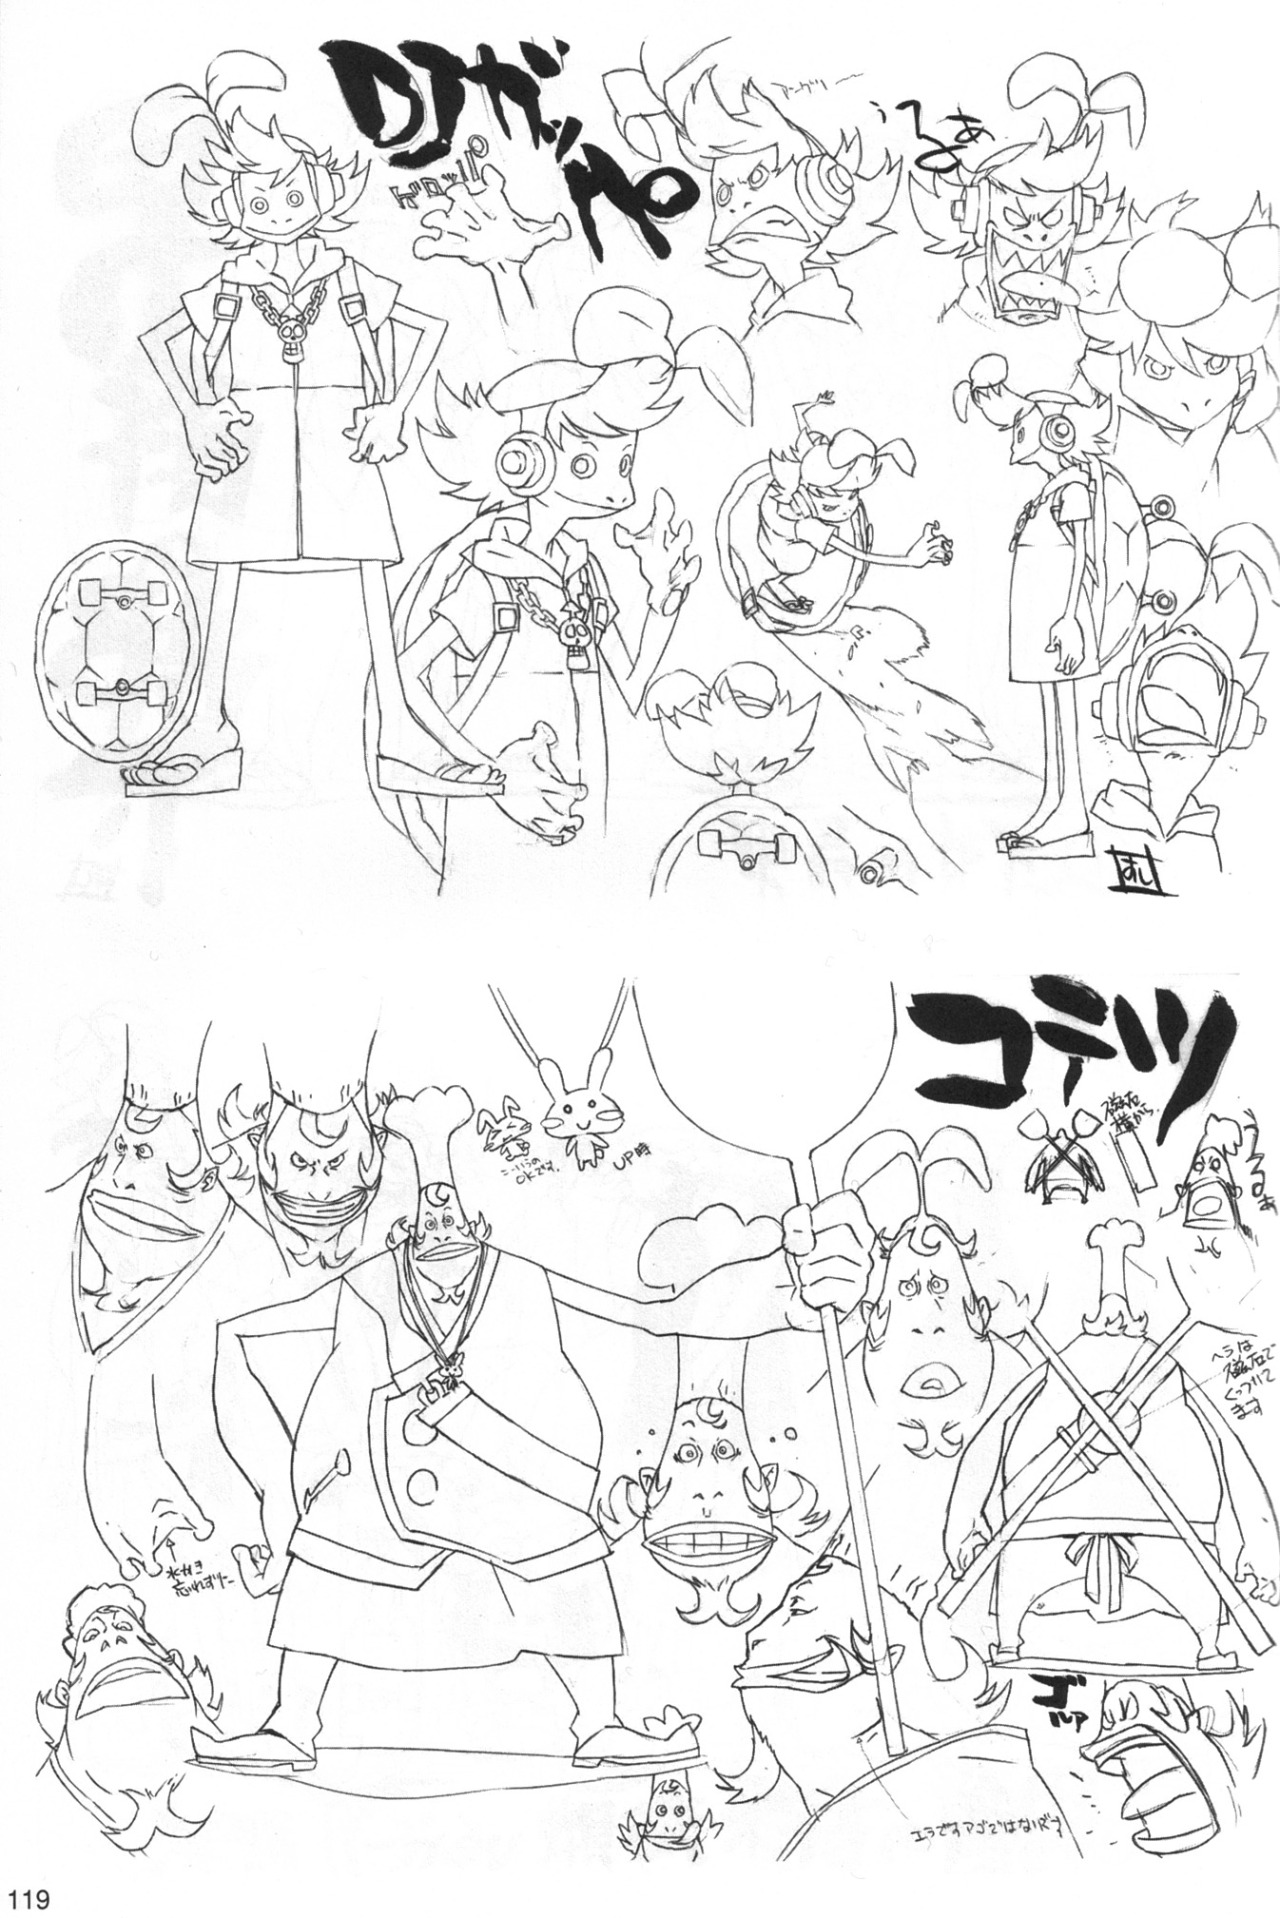 Meme Galactic Artbook Scans From One Piece Movie 6 Oddly Enough